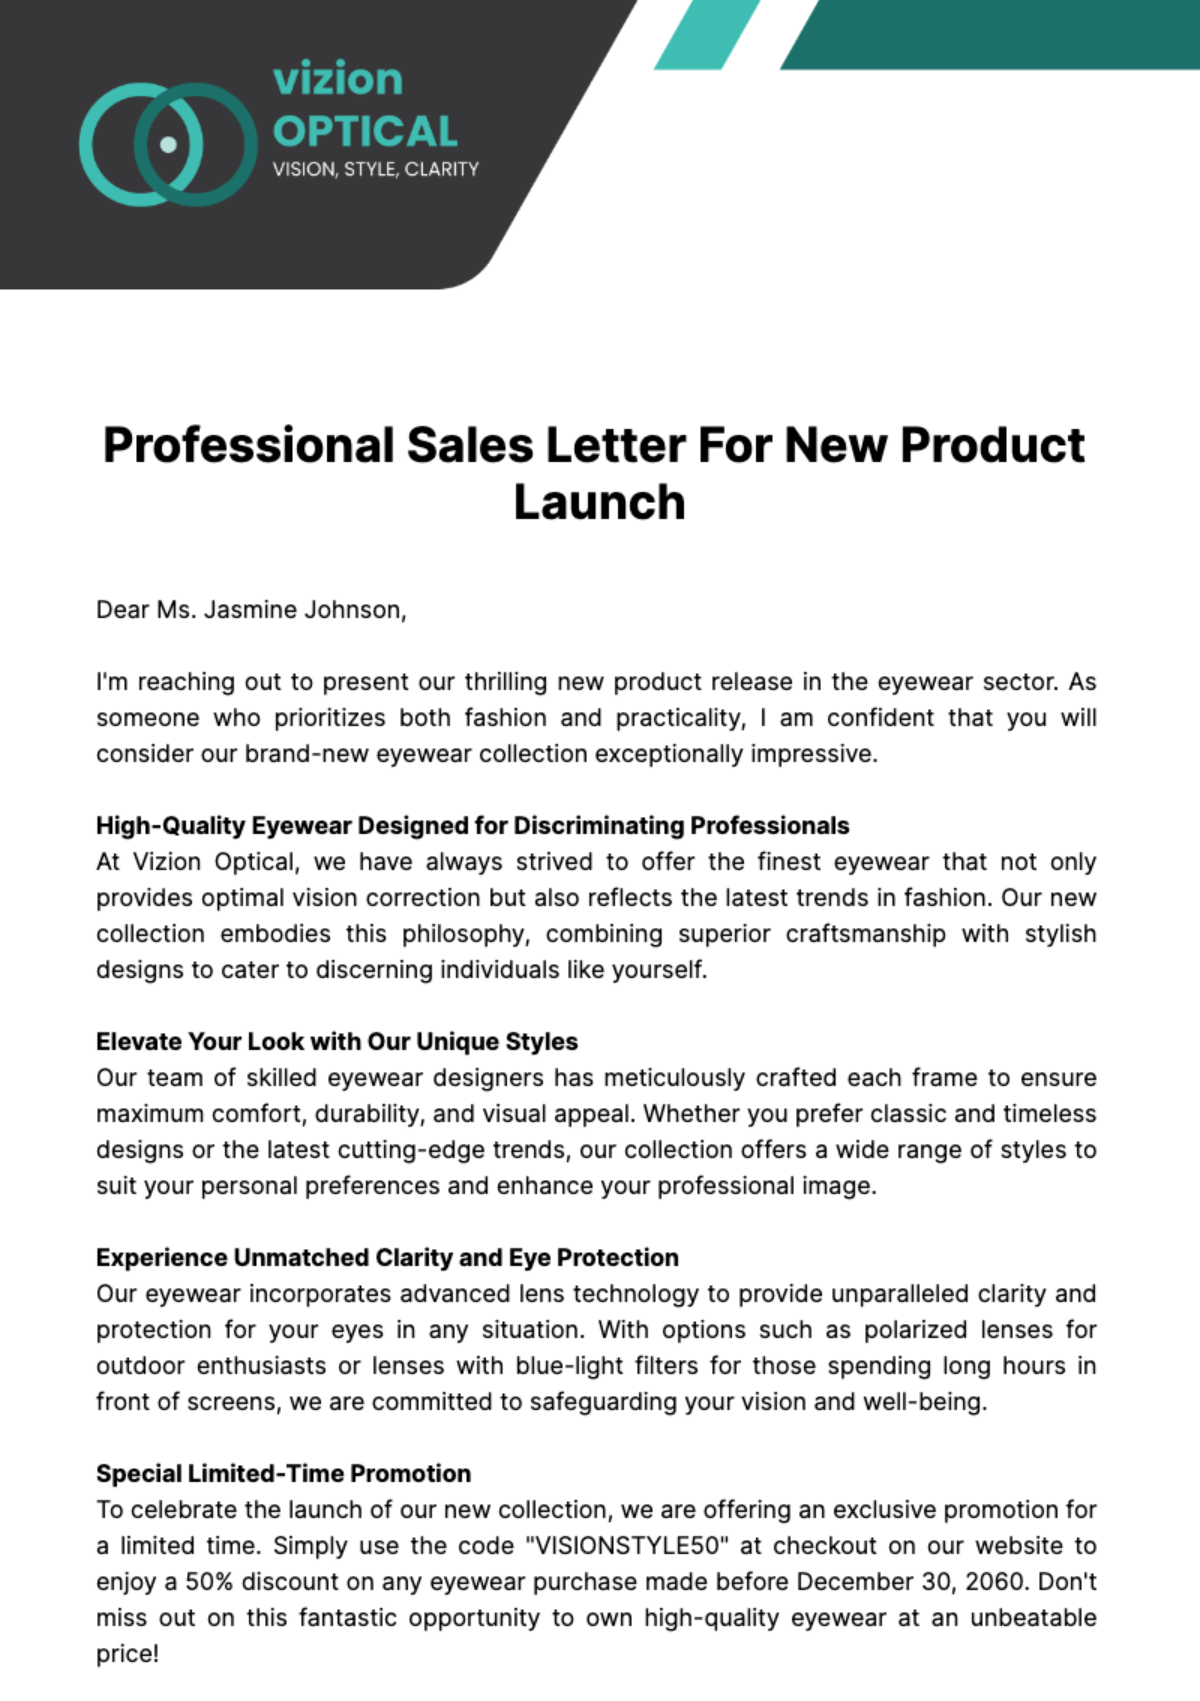 Free Professional Sales Letter for New Product Launch Template